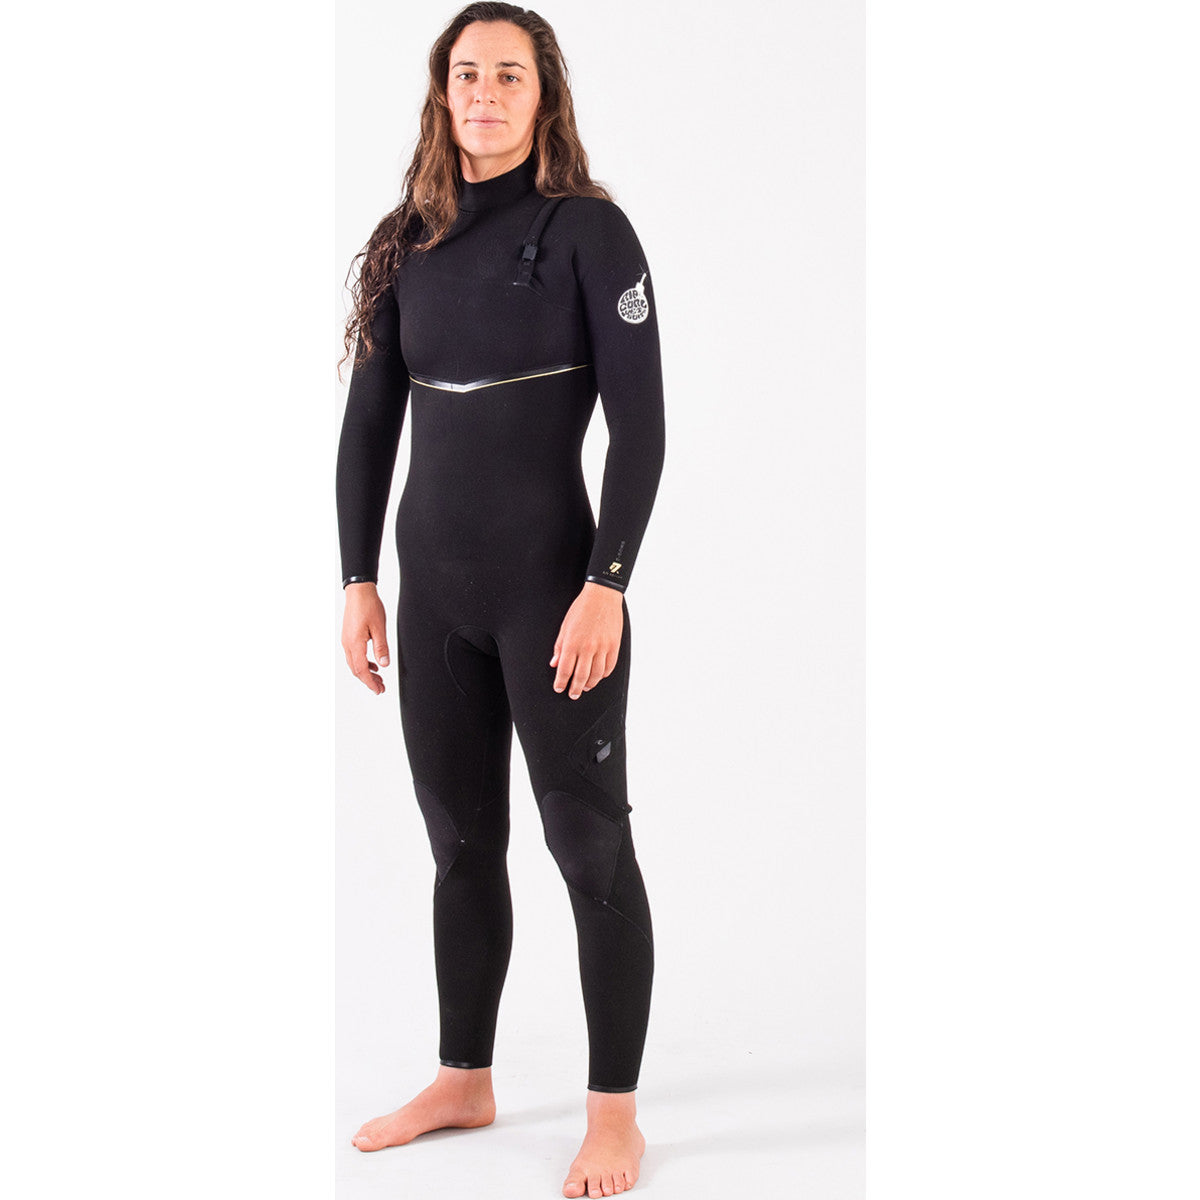 Women's E7 Limited Edition E-Bomb 3/2mm Zip Free Wetsuit